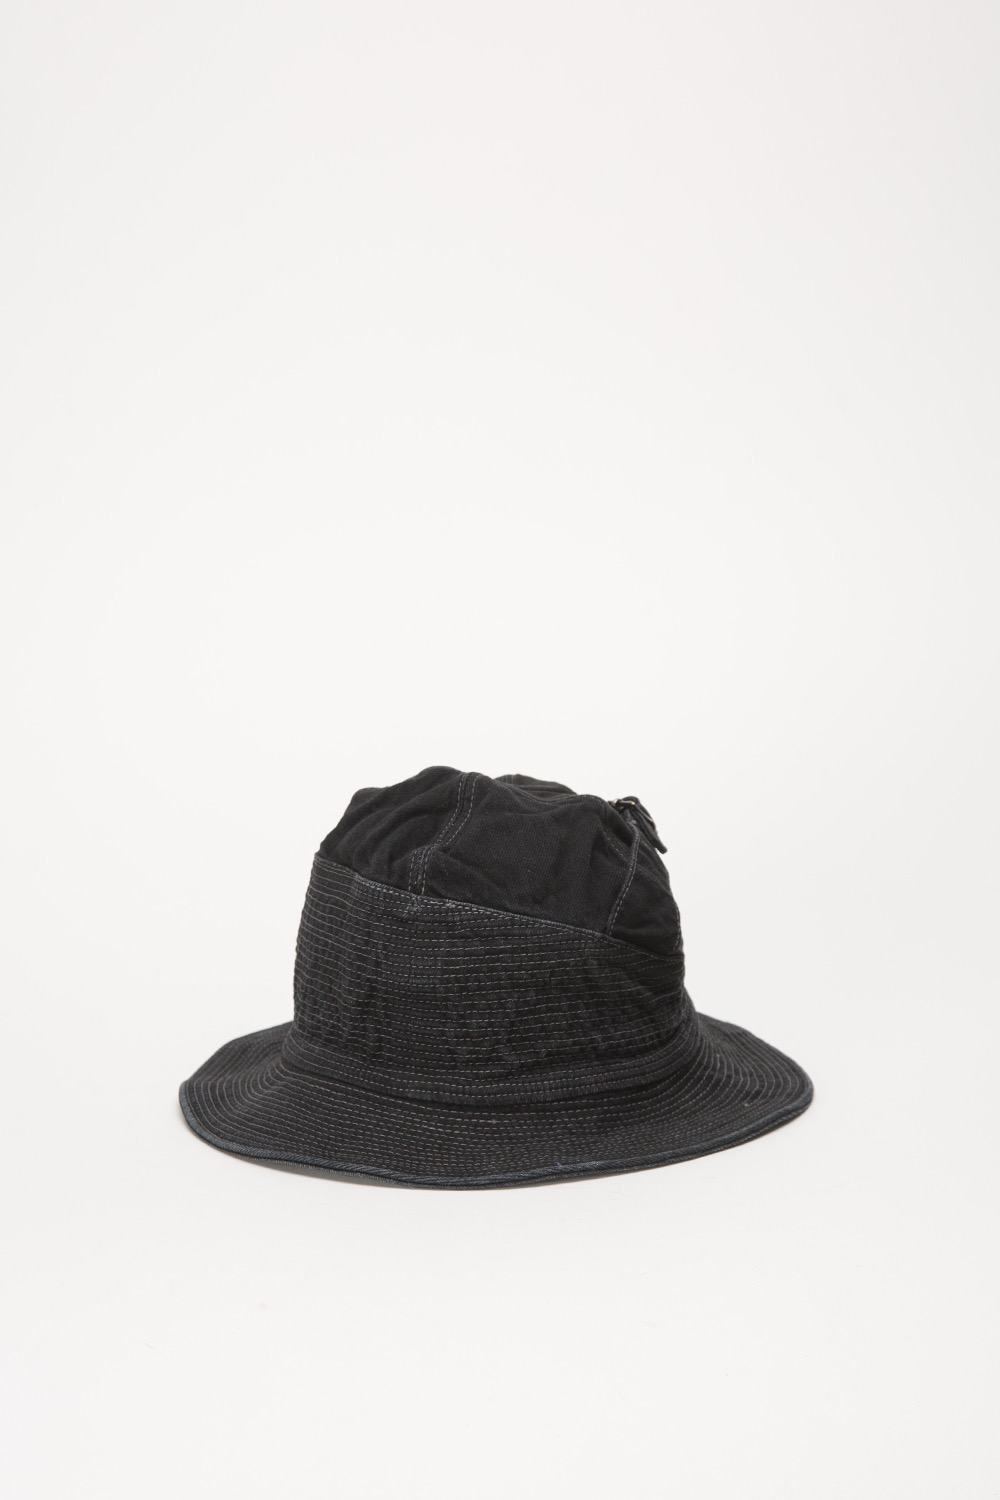 (23FW) 11.5OZBLKXBLK DENIM THE OLD MAN AND THE SEA HAT BLACK/BLACK